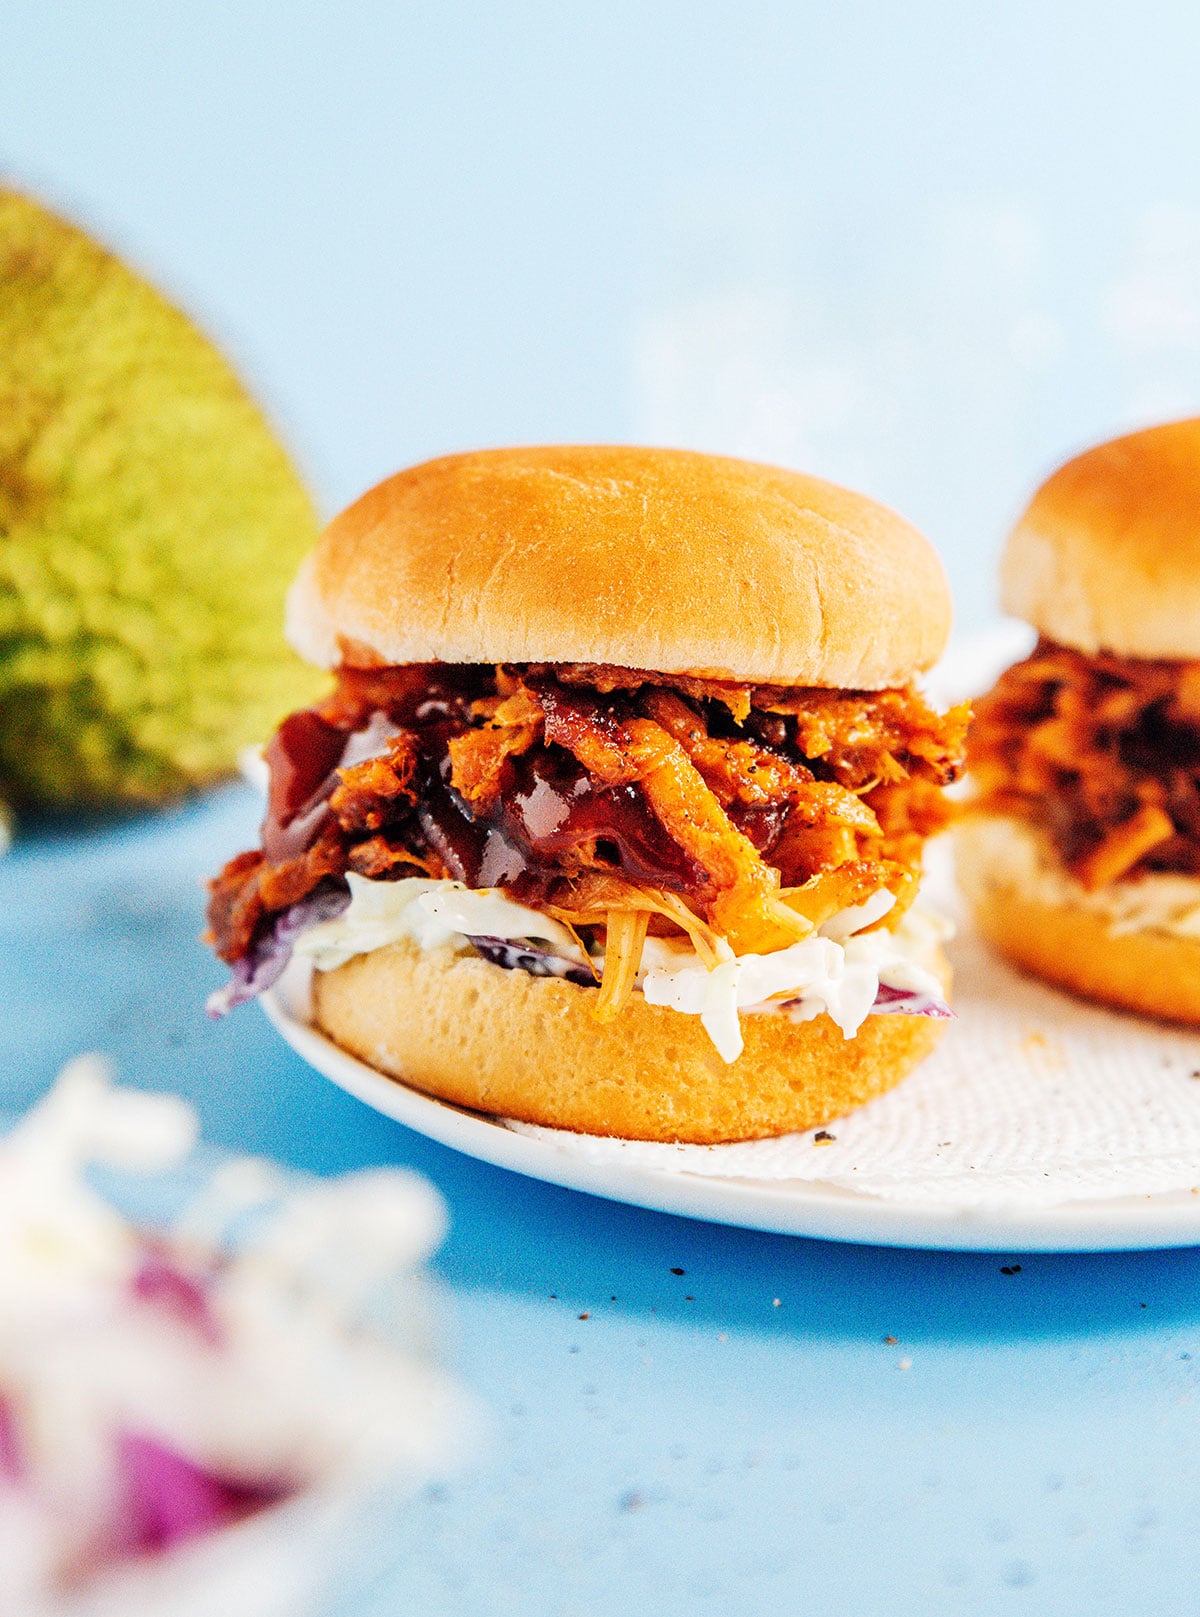 Up close image of bbq jackfruit slider with coleslaw and dripped bbq sauce.